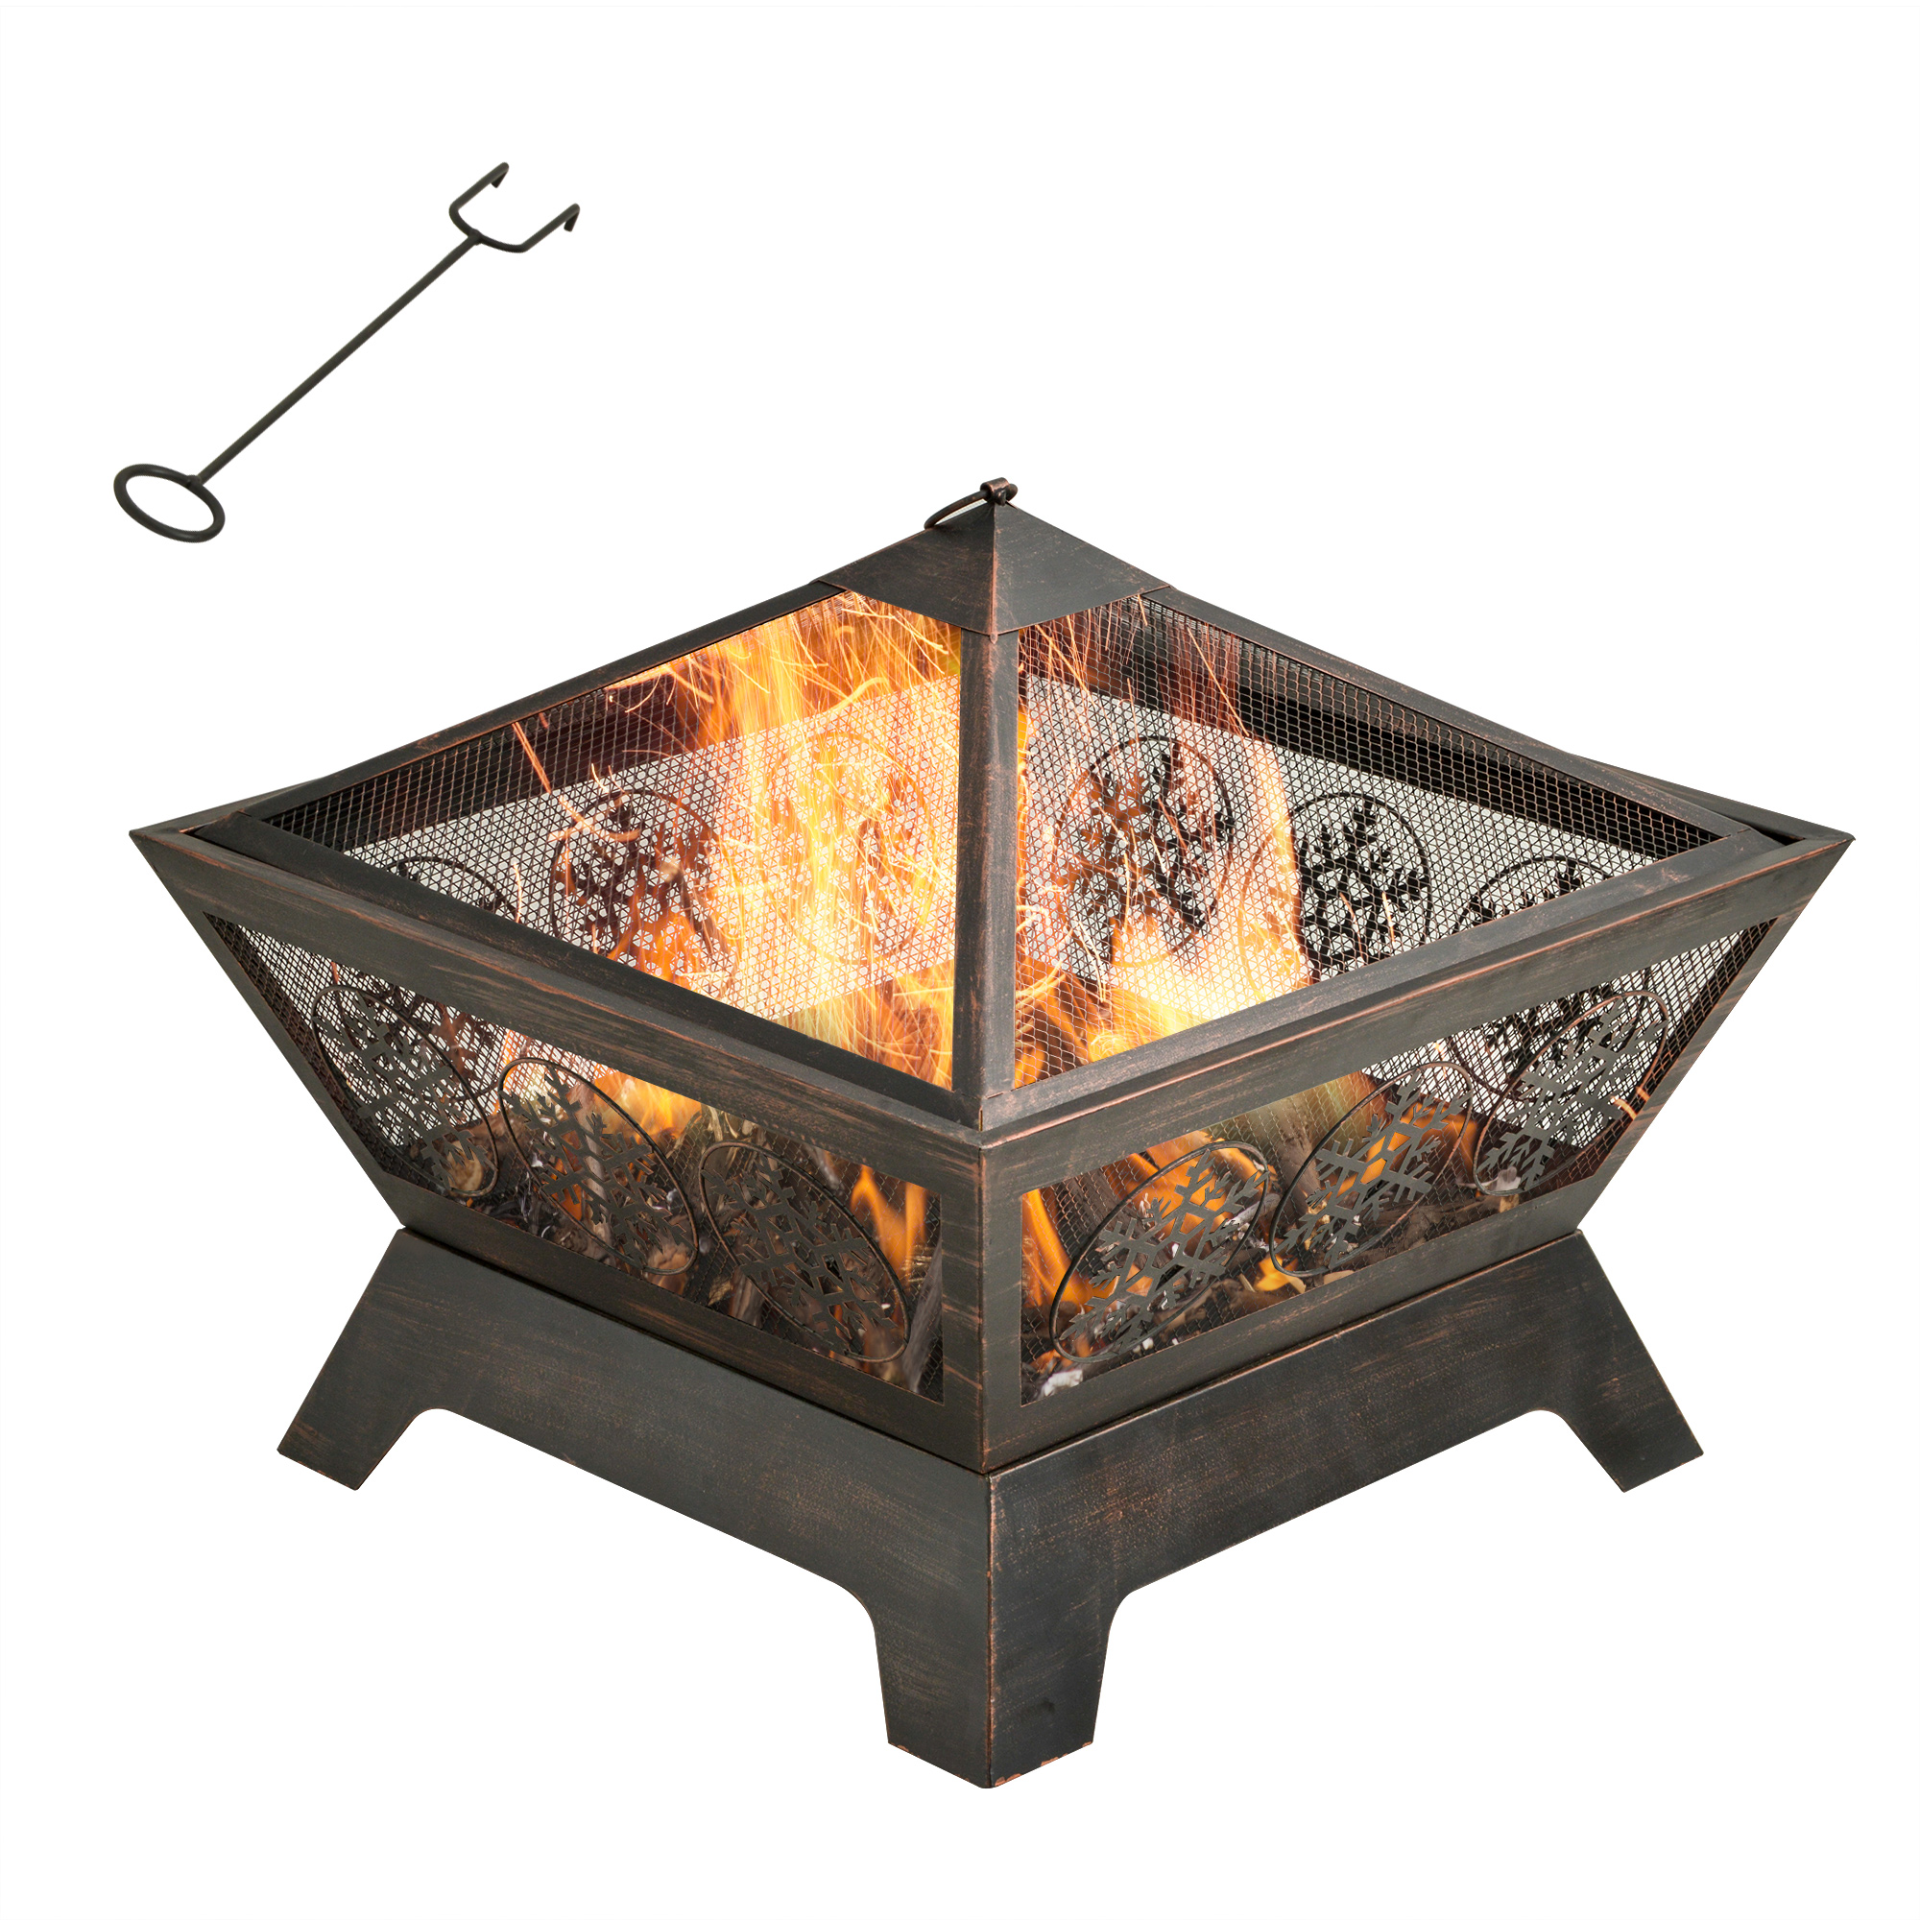 Outsunny Outdoor Fire Pit, Metal Square Firepit Bowl with Spark Screen, Poker - Stay Warm and Cozy Firepit Cosy Camping Co. Bronze Tone  